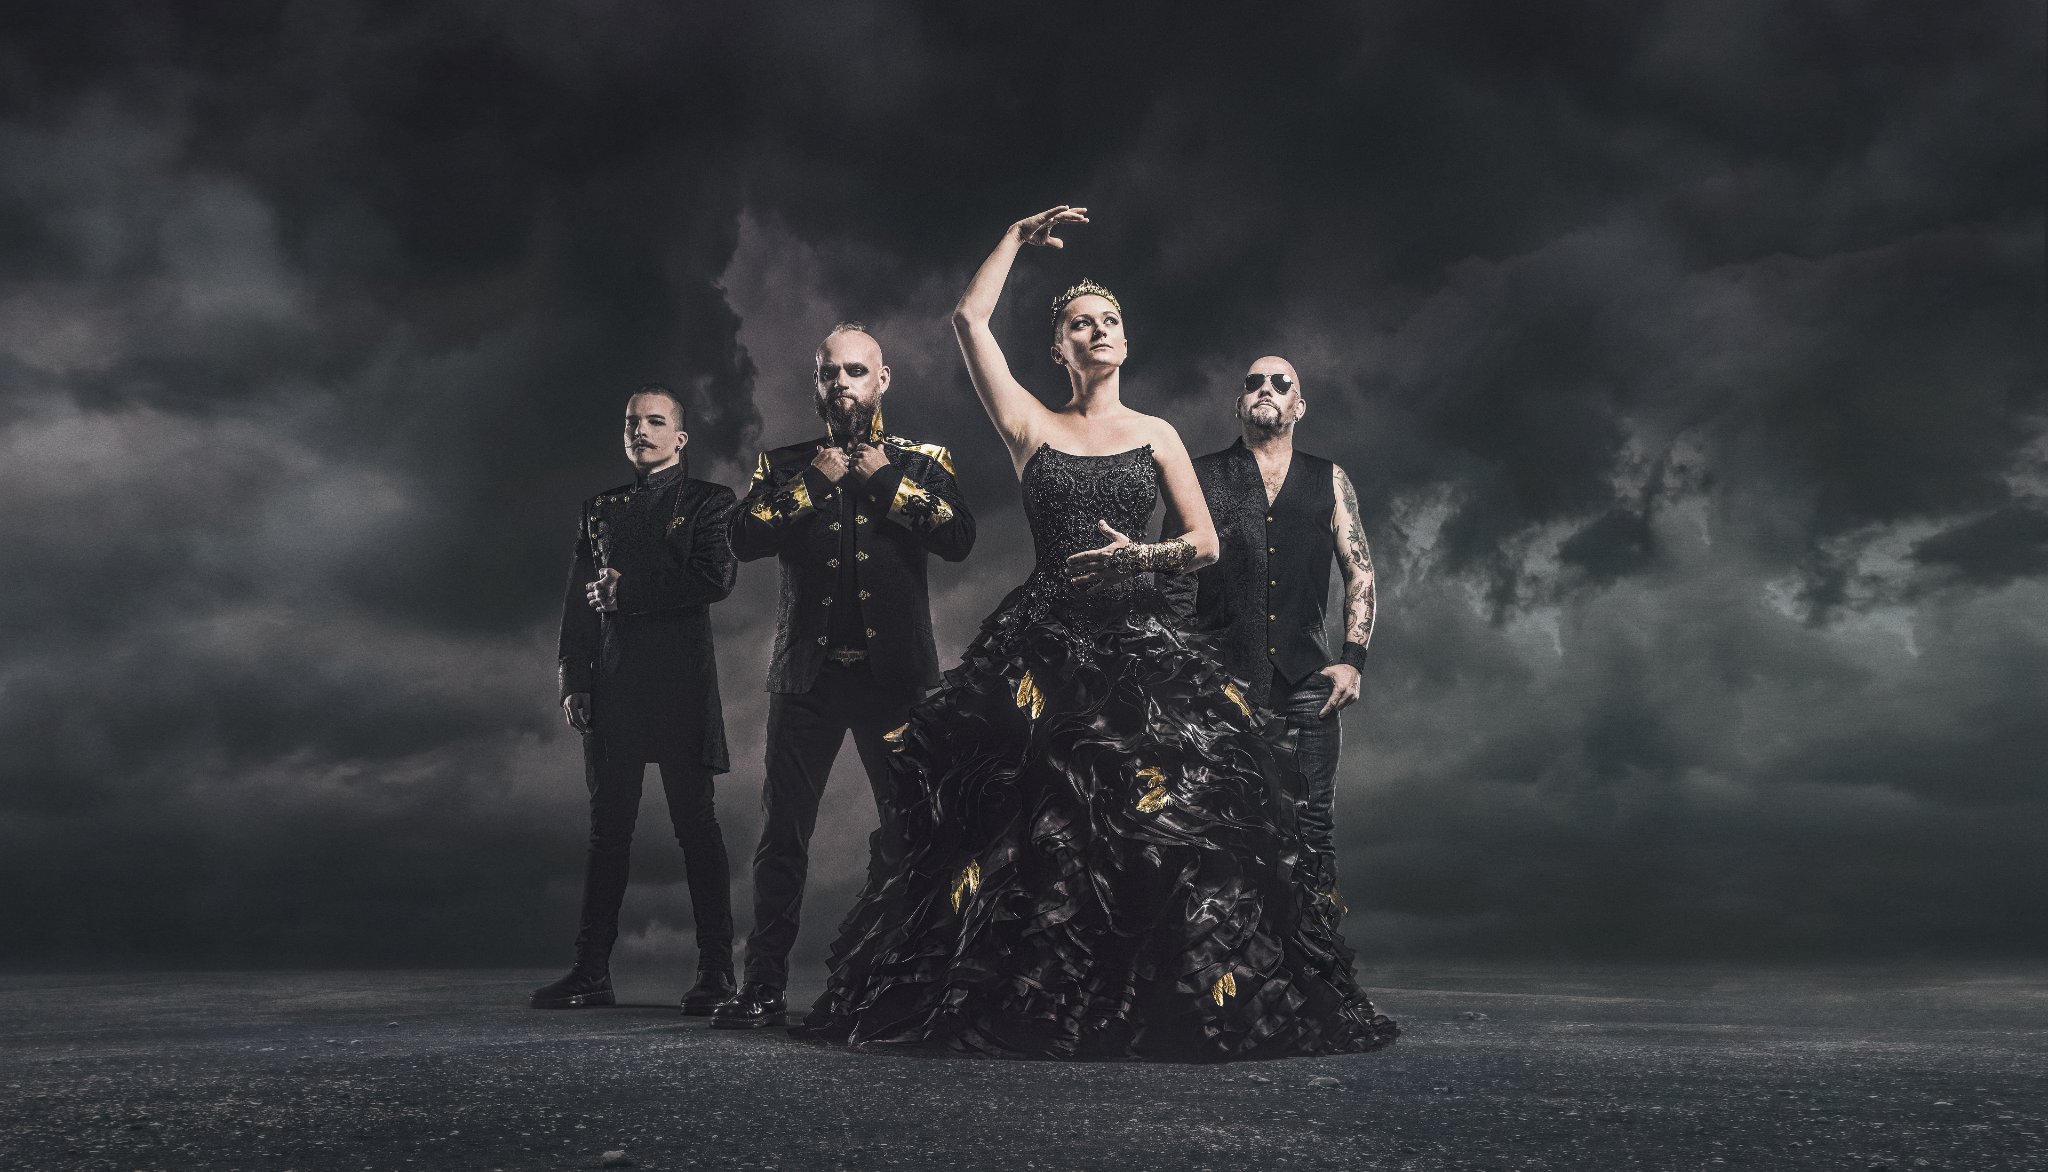 Dark, heavy, captivating and full of personality, German gothic metal band MONO INC return to the stage and release new EP ‘Lieb Mich’.